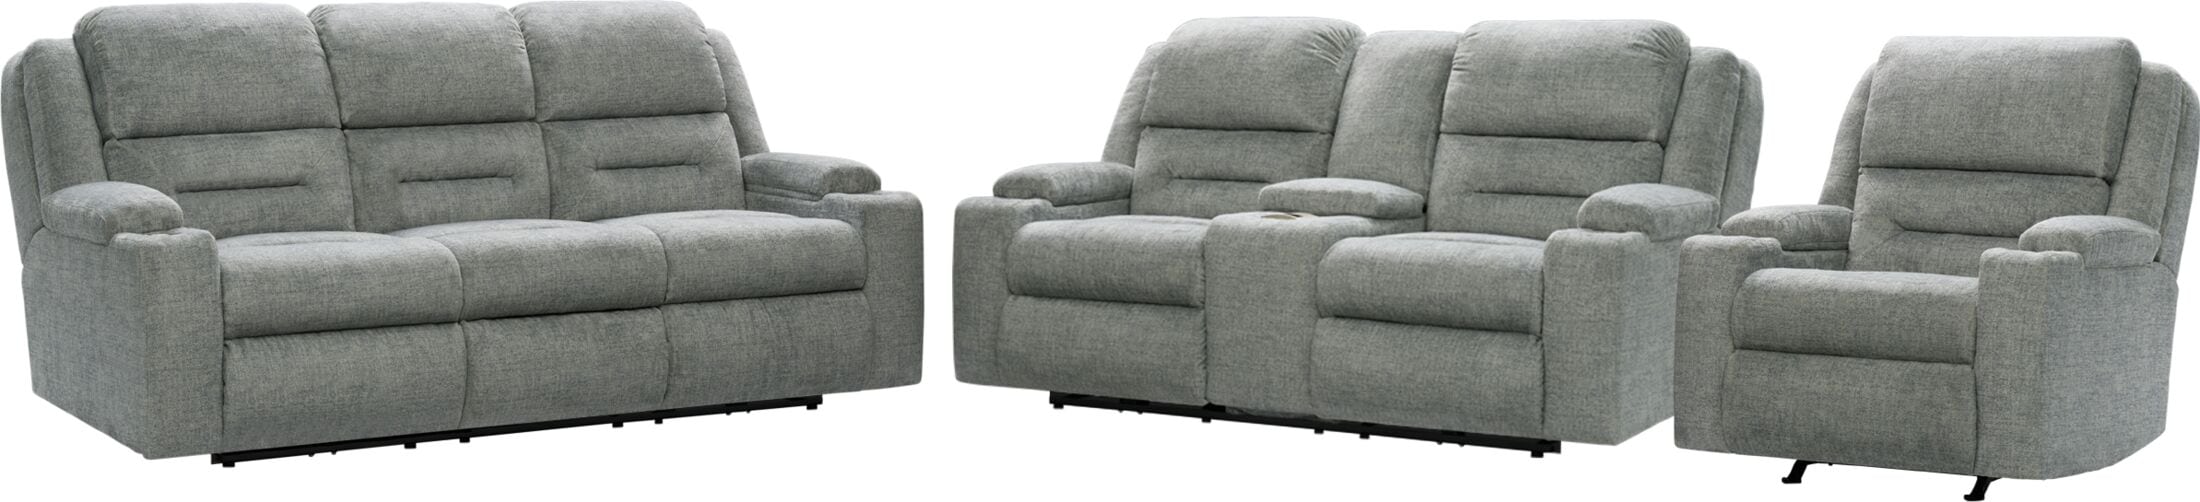 Concourse Dual-Power Reclining Sofa, Loveseat and Rocker Recliner ...